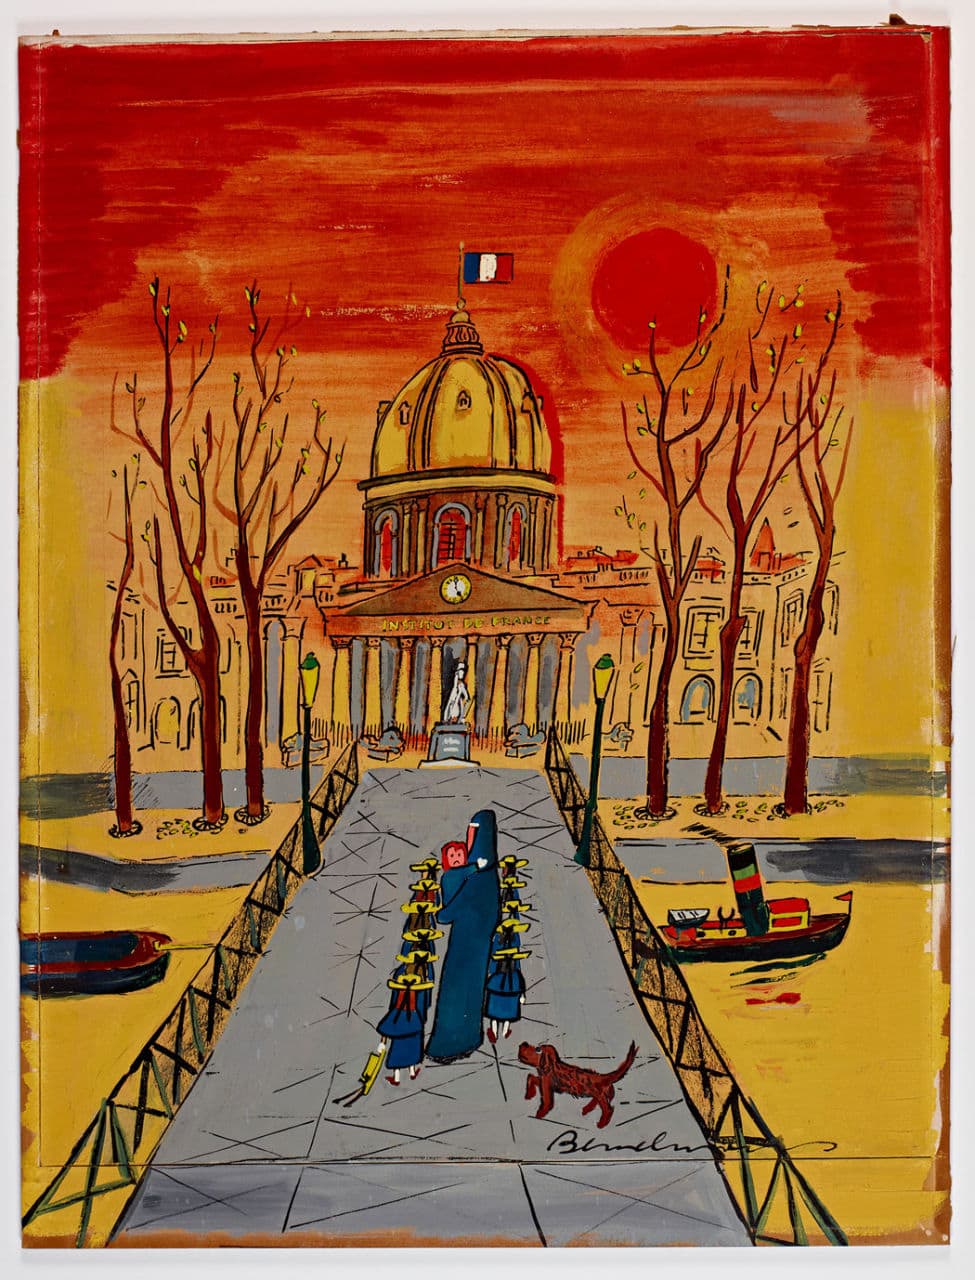 Cover for “Madeline’s Rescue,” gouache, 1953. (From the Eric Carle Museum exhibition. © Ludwig Bemelmans, LLC)